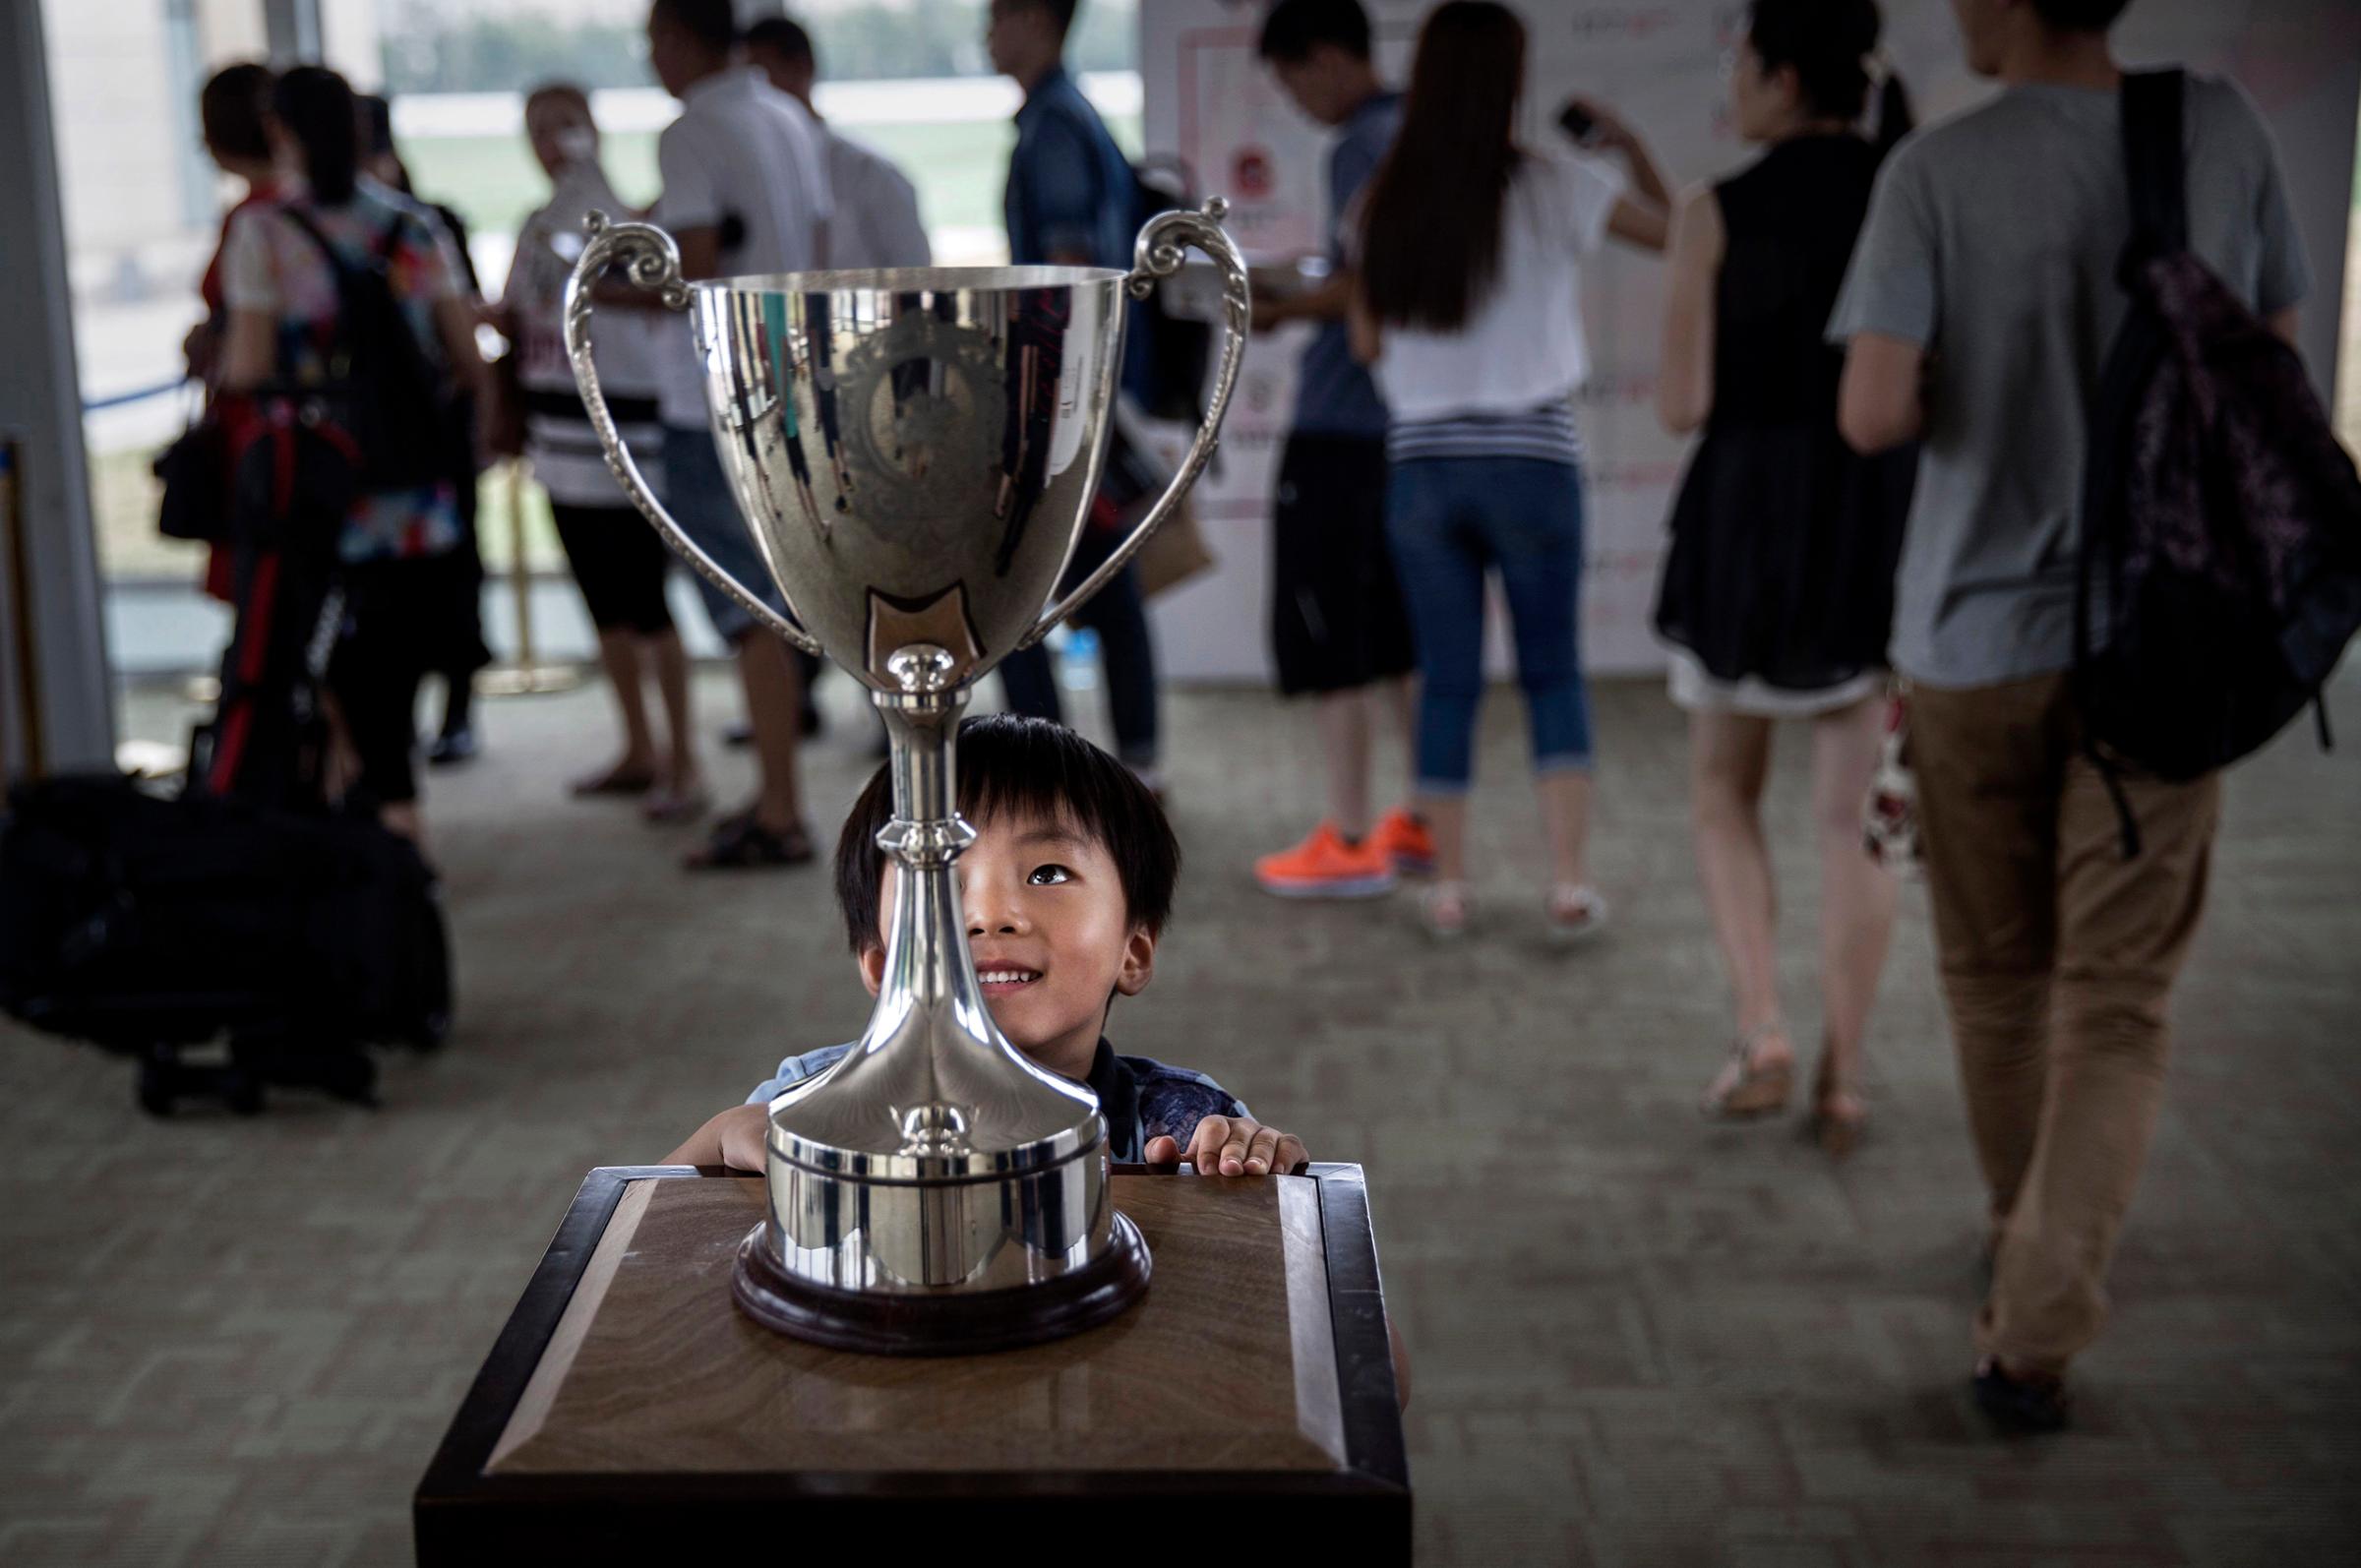 A boy looks at the cup before a match at the Tianjin Goldin Metropolitan Polo Club in Tianjin, China, on July 17, 2016.